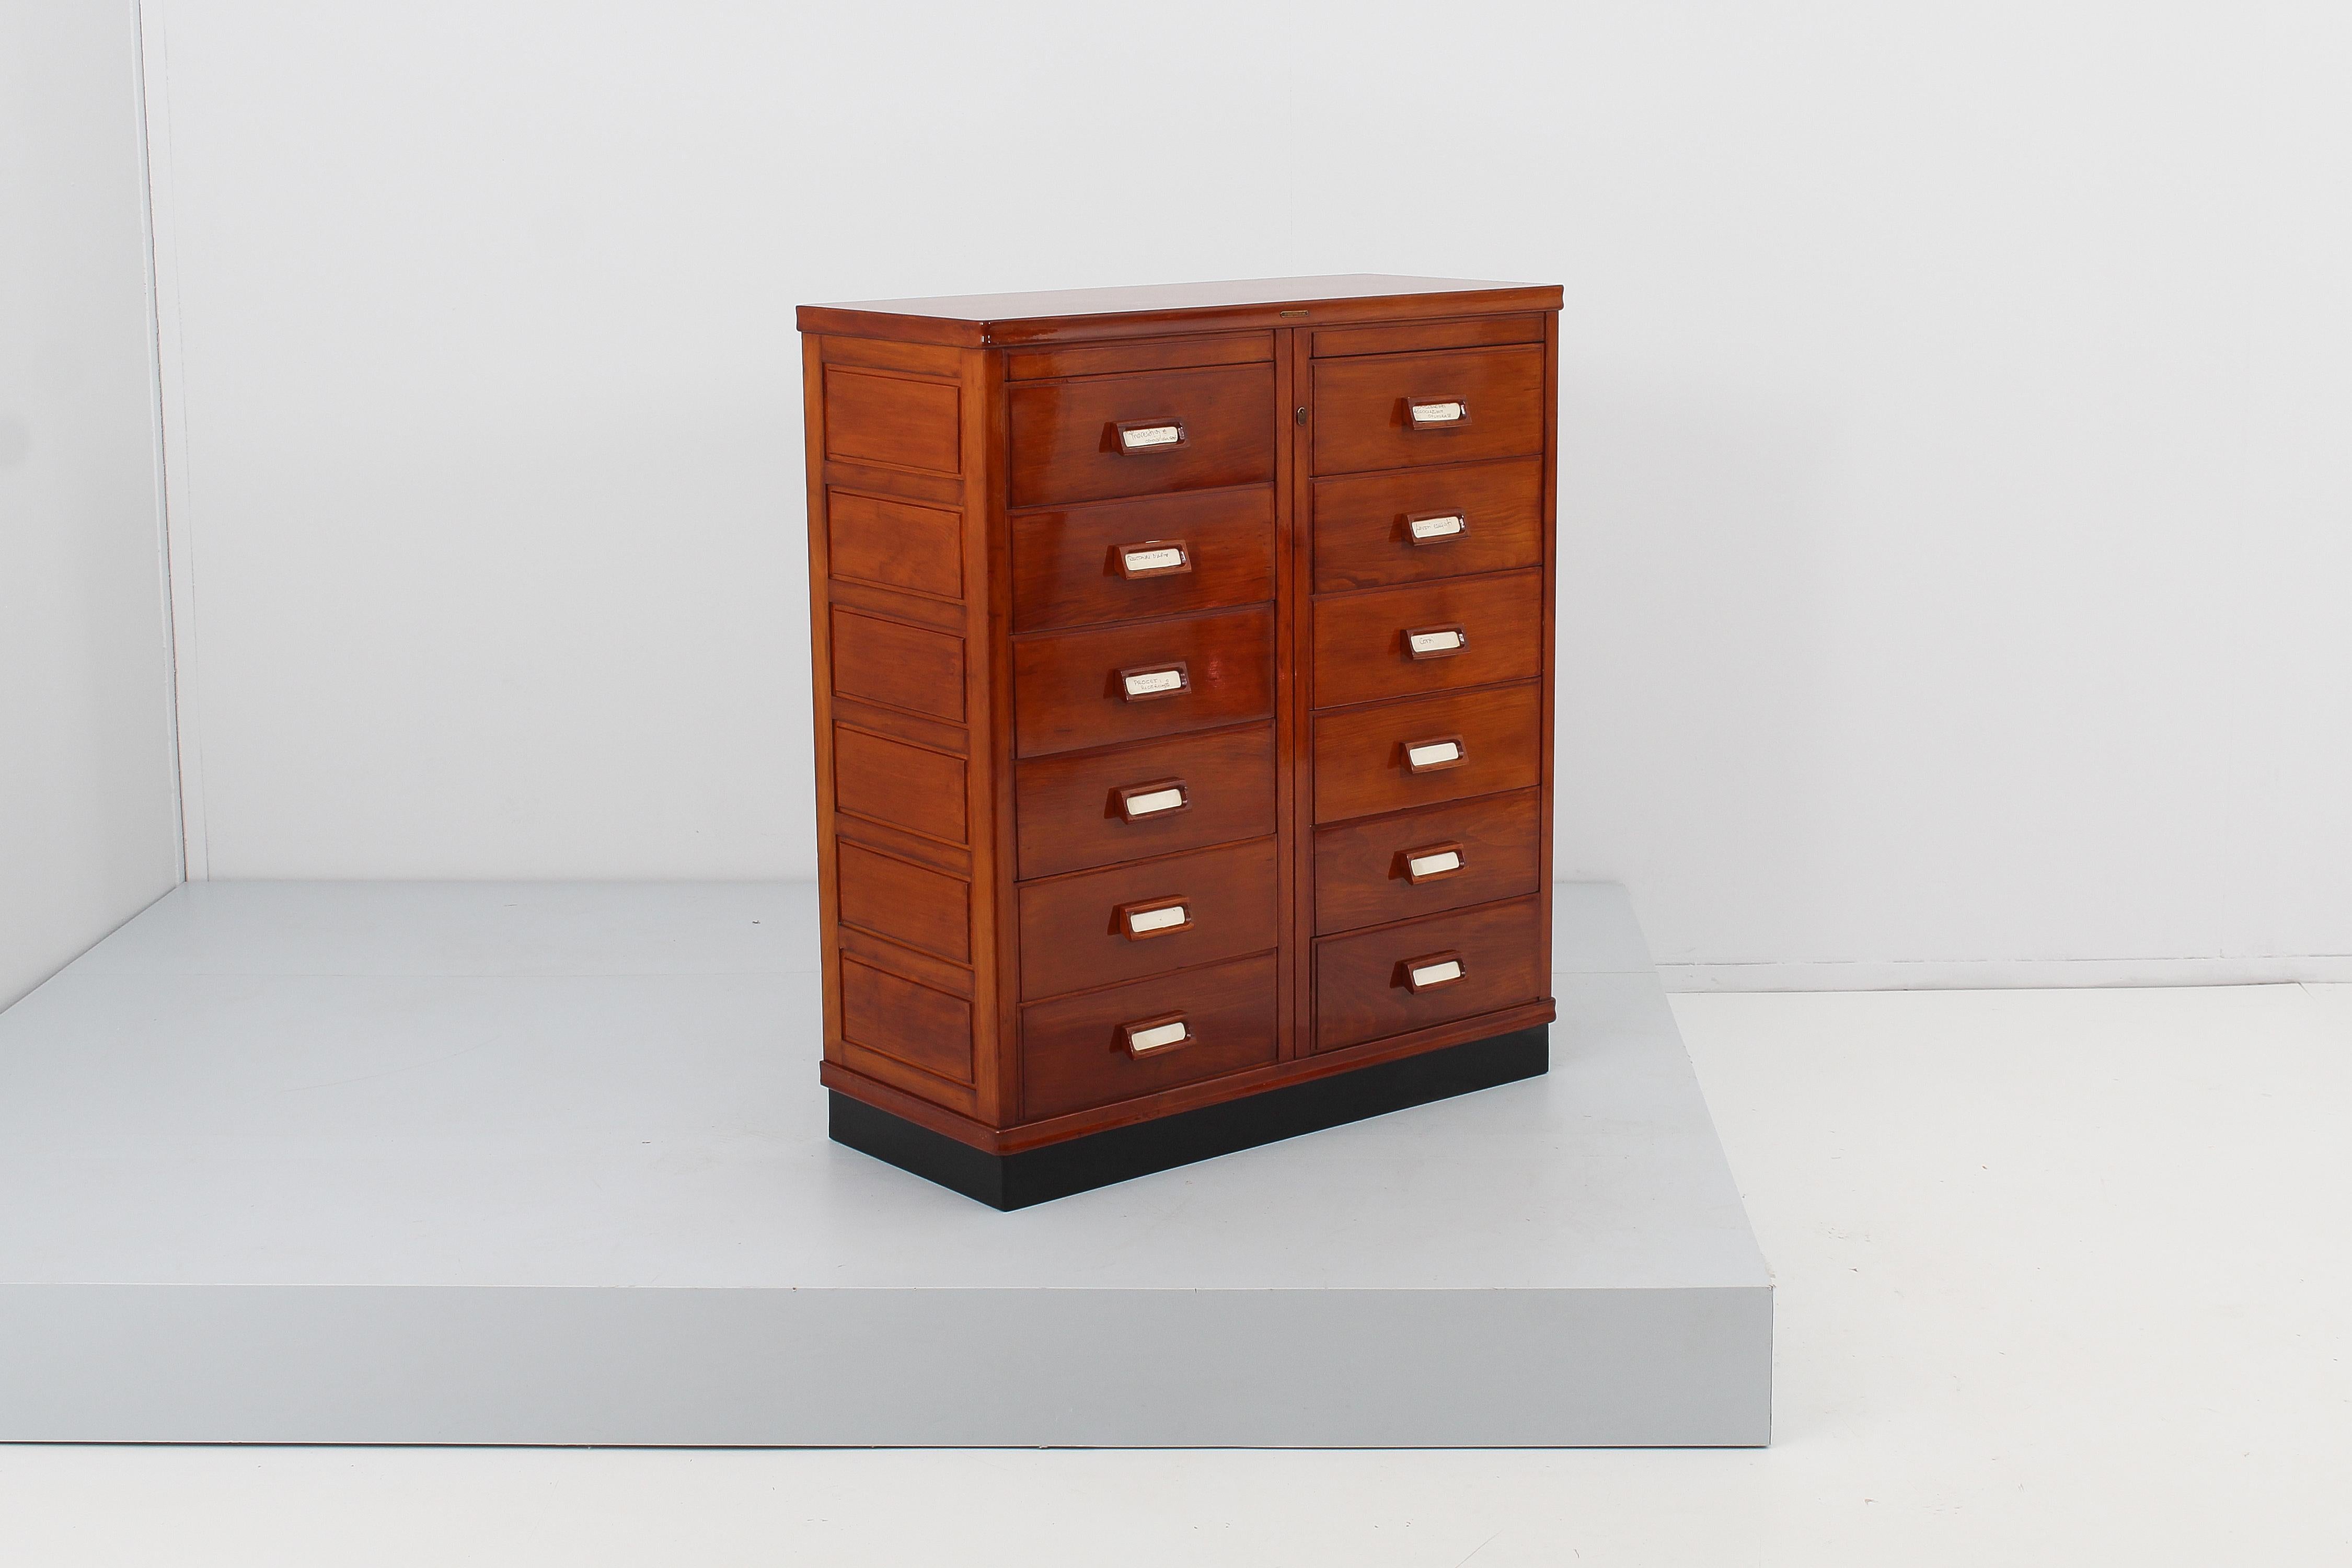 Huge and prestigious filing cabinet with twelve capacious drawers, with flap front part to facilitate the consultation of the documents inside. Each drawer has a compartment for the label. The recently restored piece of furniture has the original